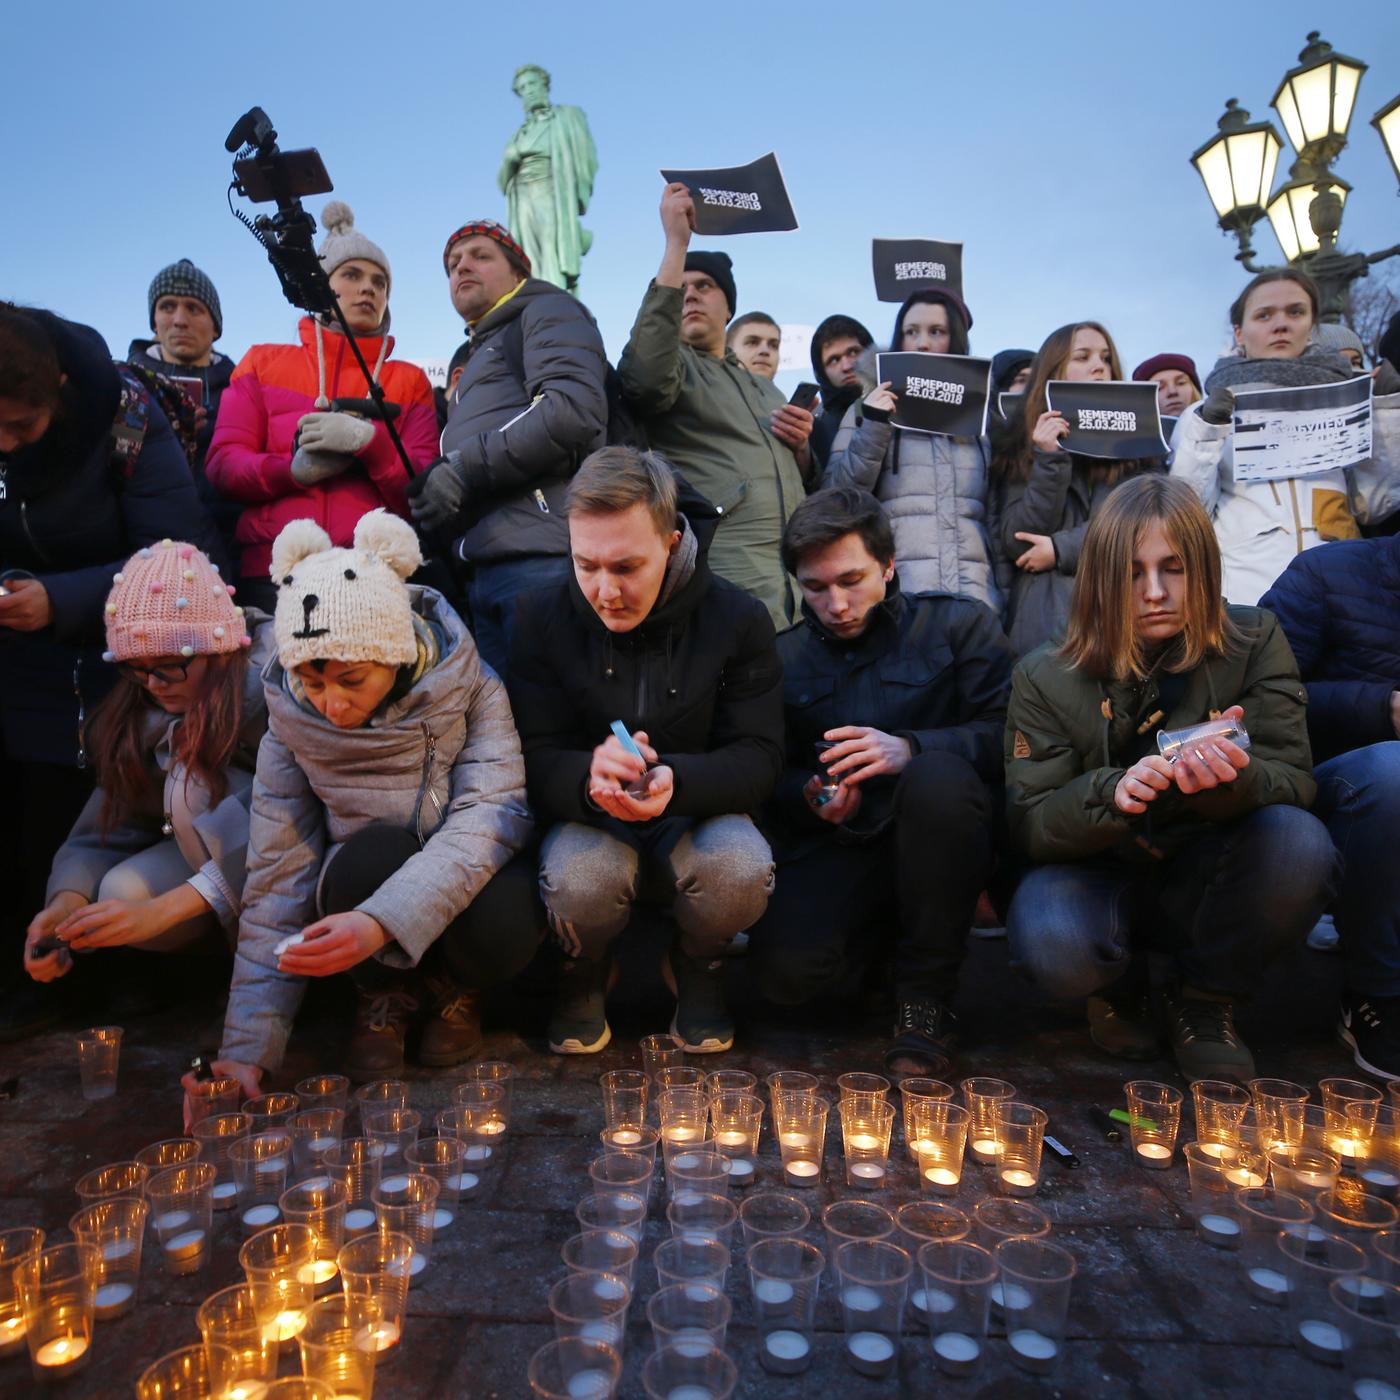 Thousands Protest in Russia After Mall Fire Claims 64 Lives